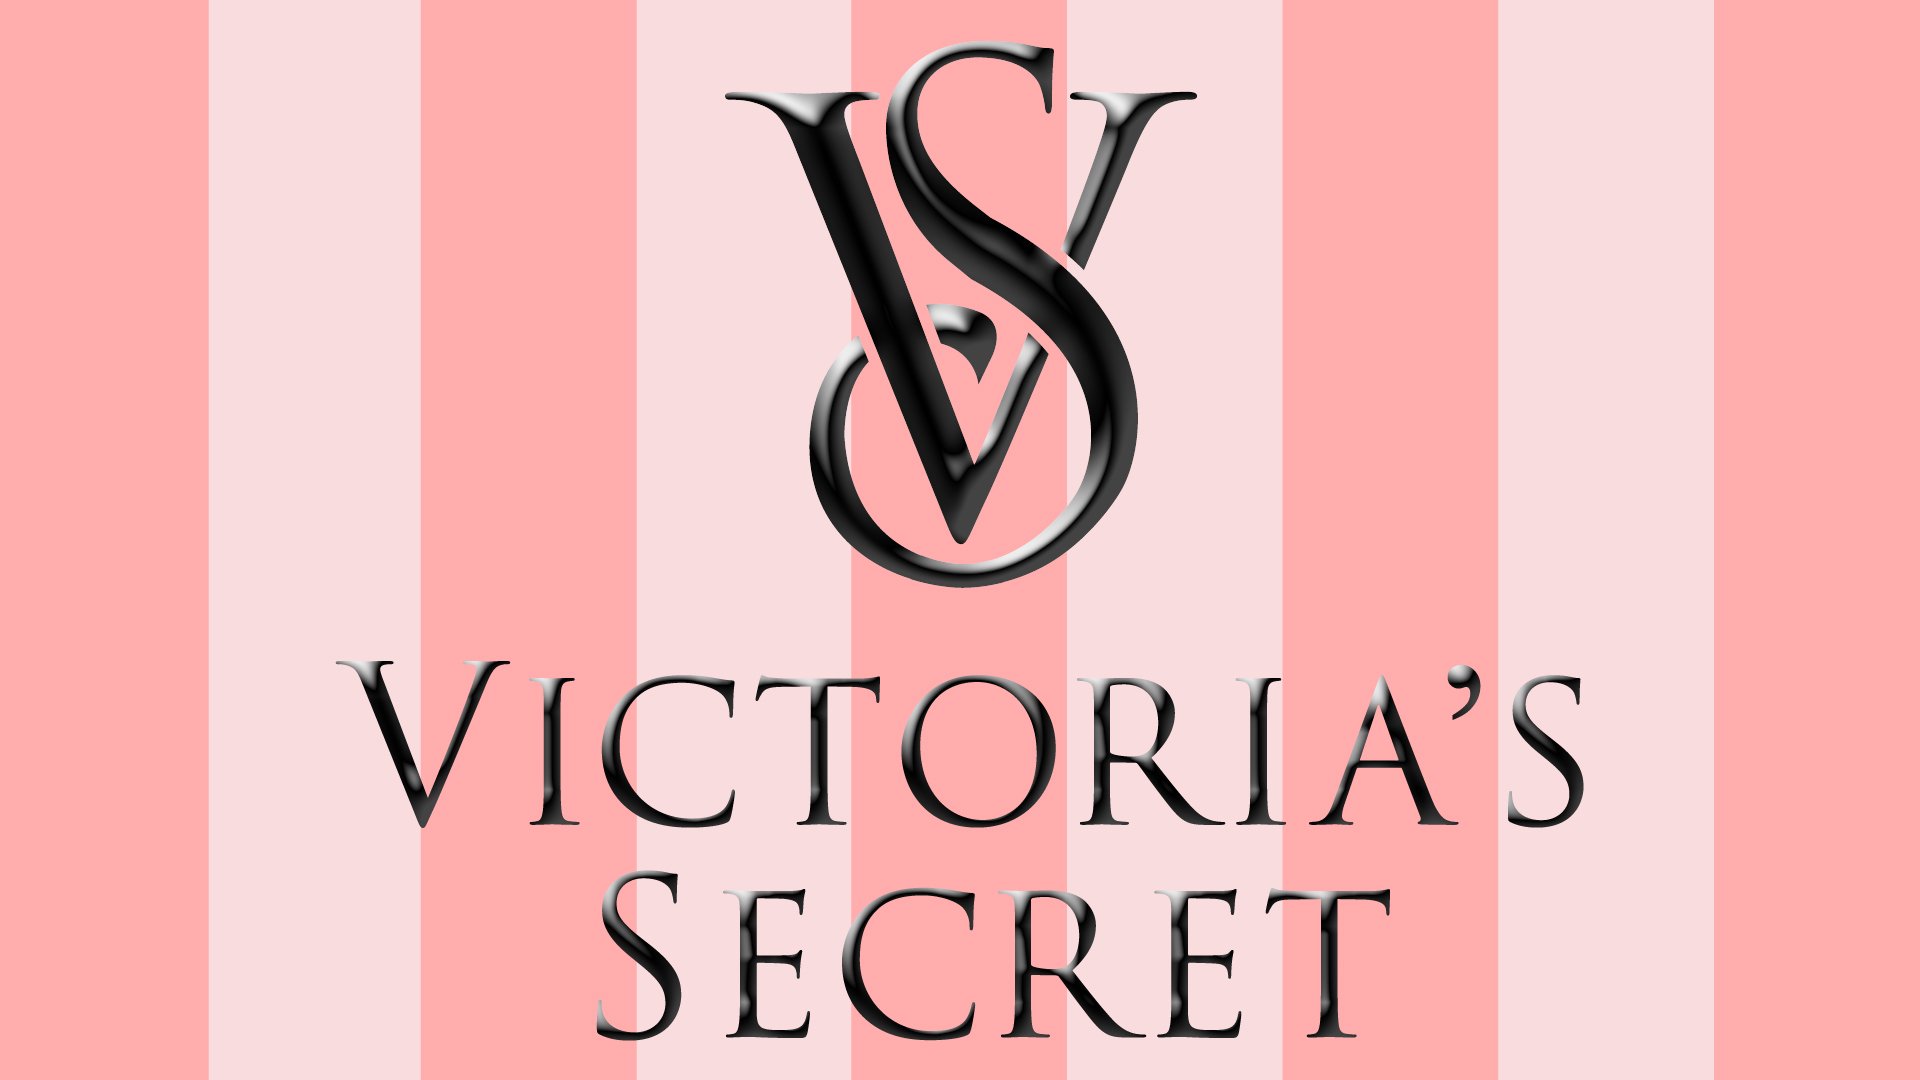 OPINION Why Victoria's Secret Suddenly Lost Its CEO